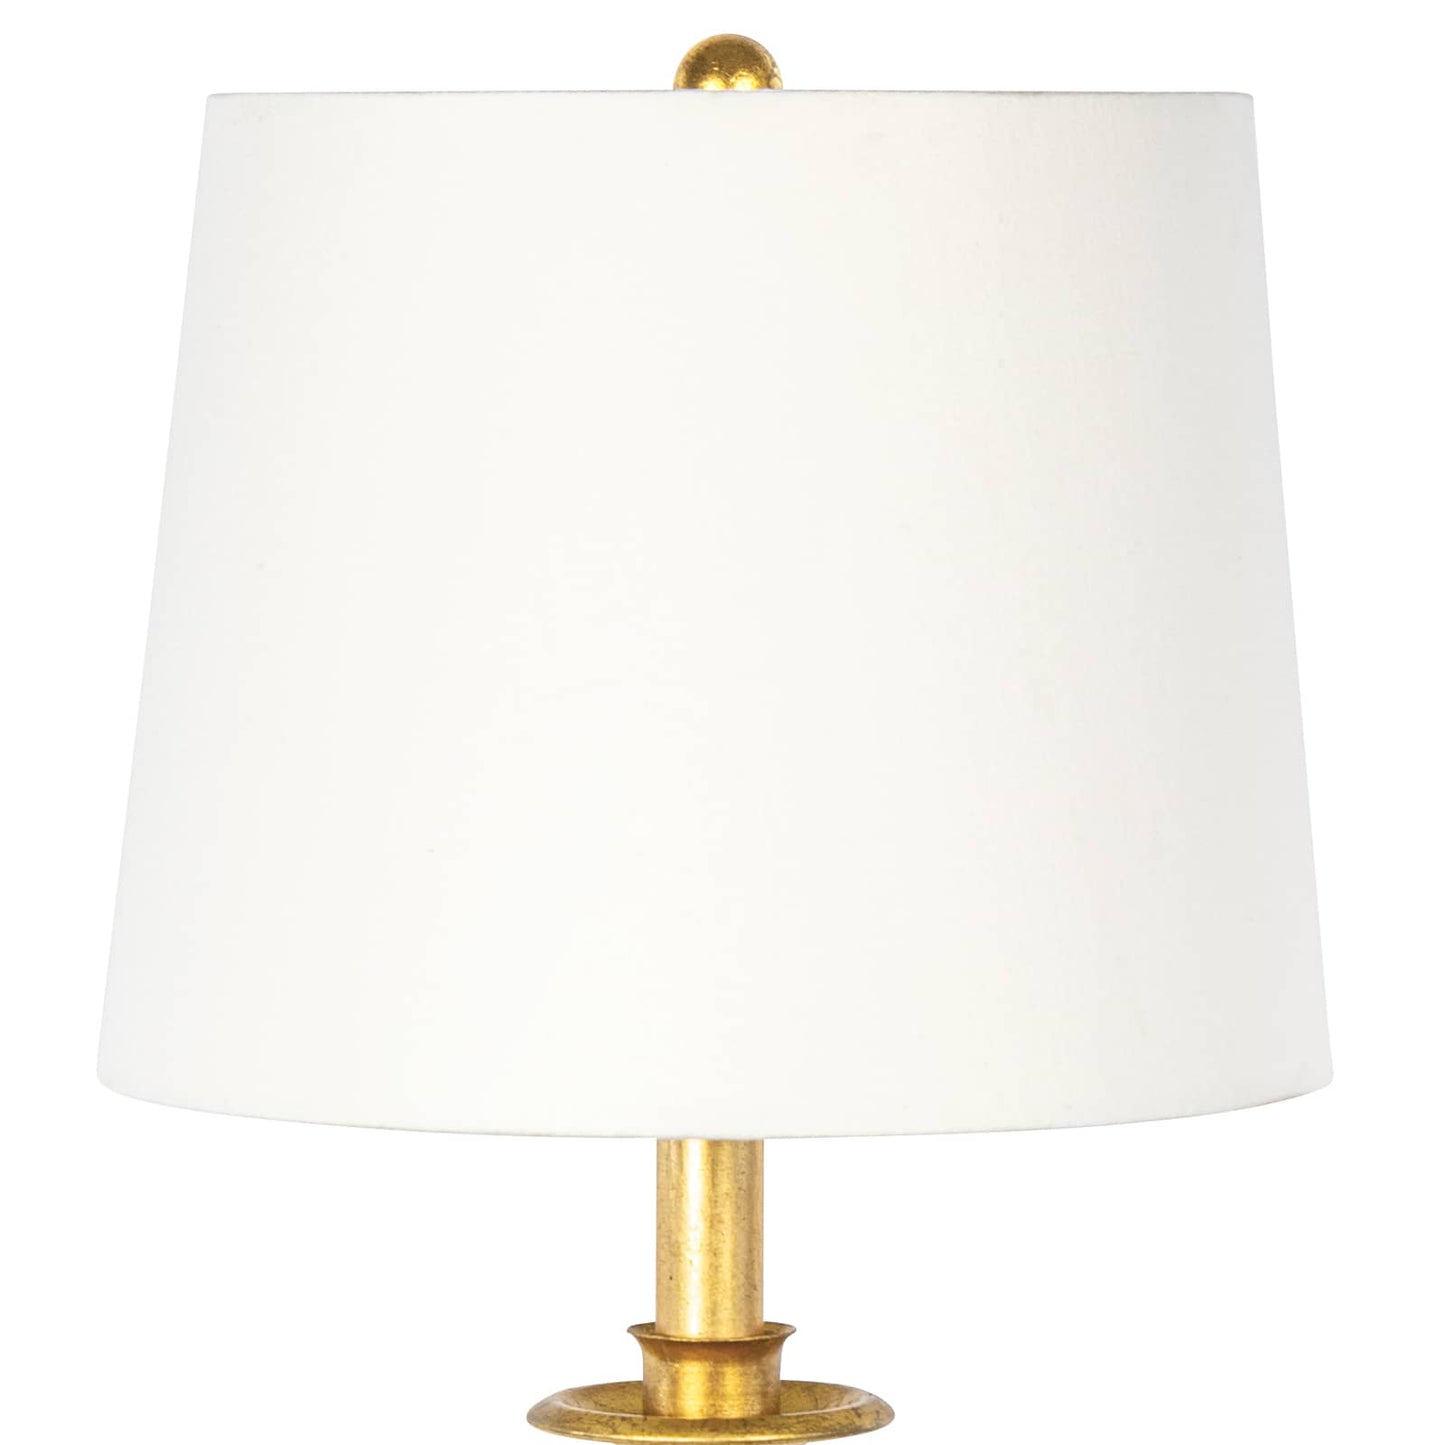 Fisher Stem Buffet Lamp by Southern Living